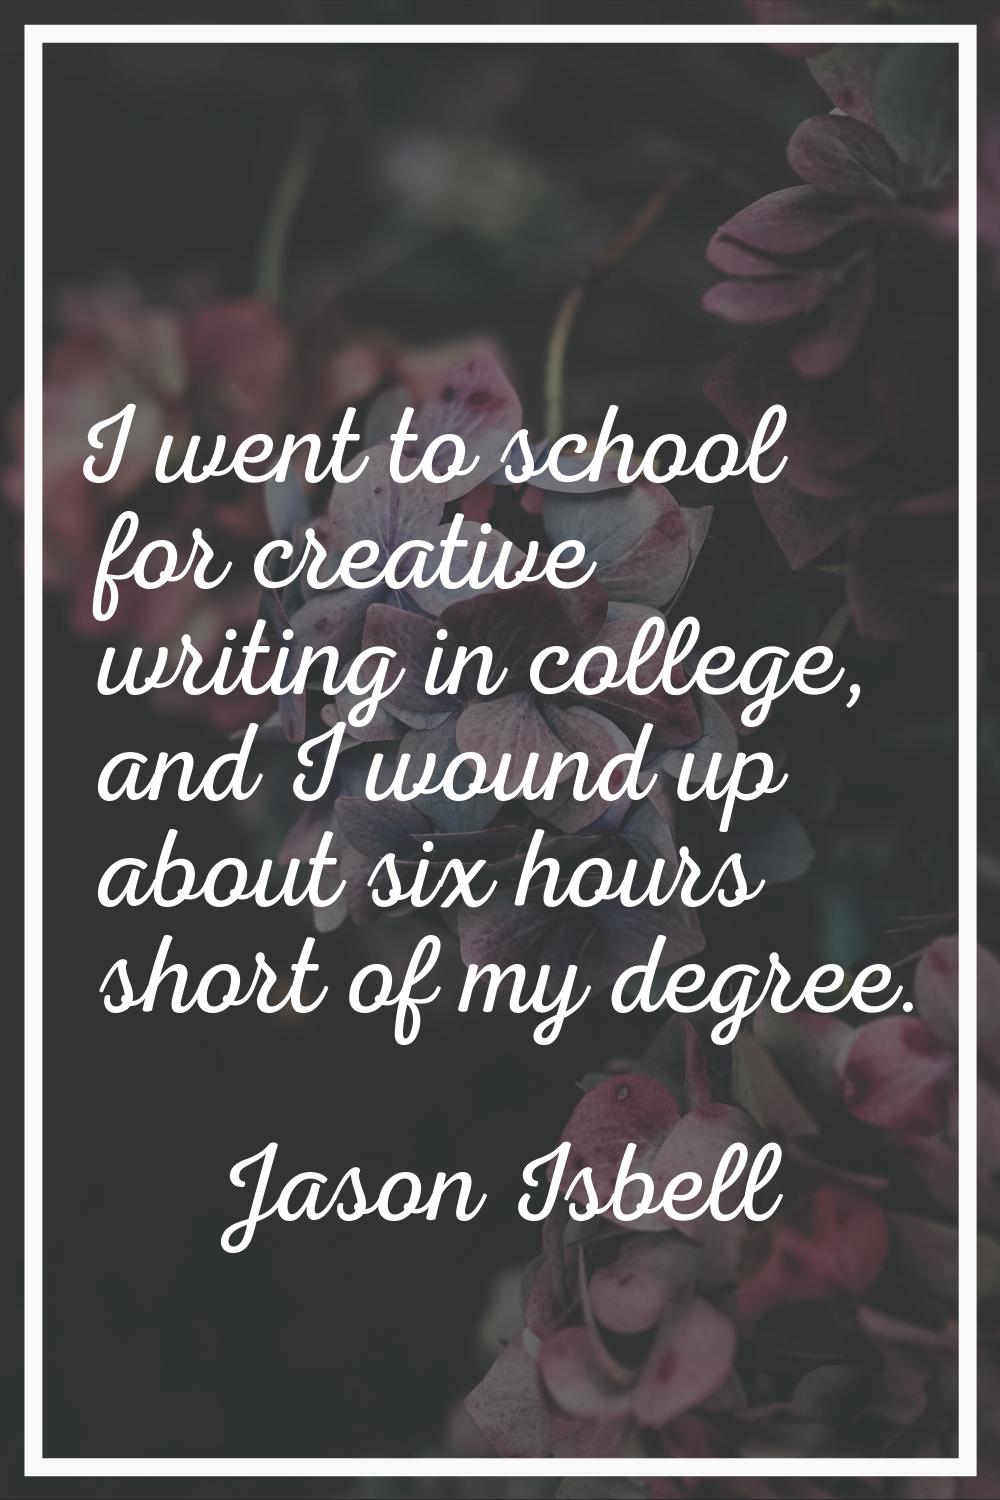 I went to school for creative writing in college, and I wound up about six hours short of my degree